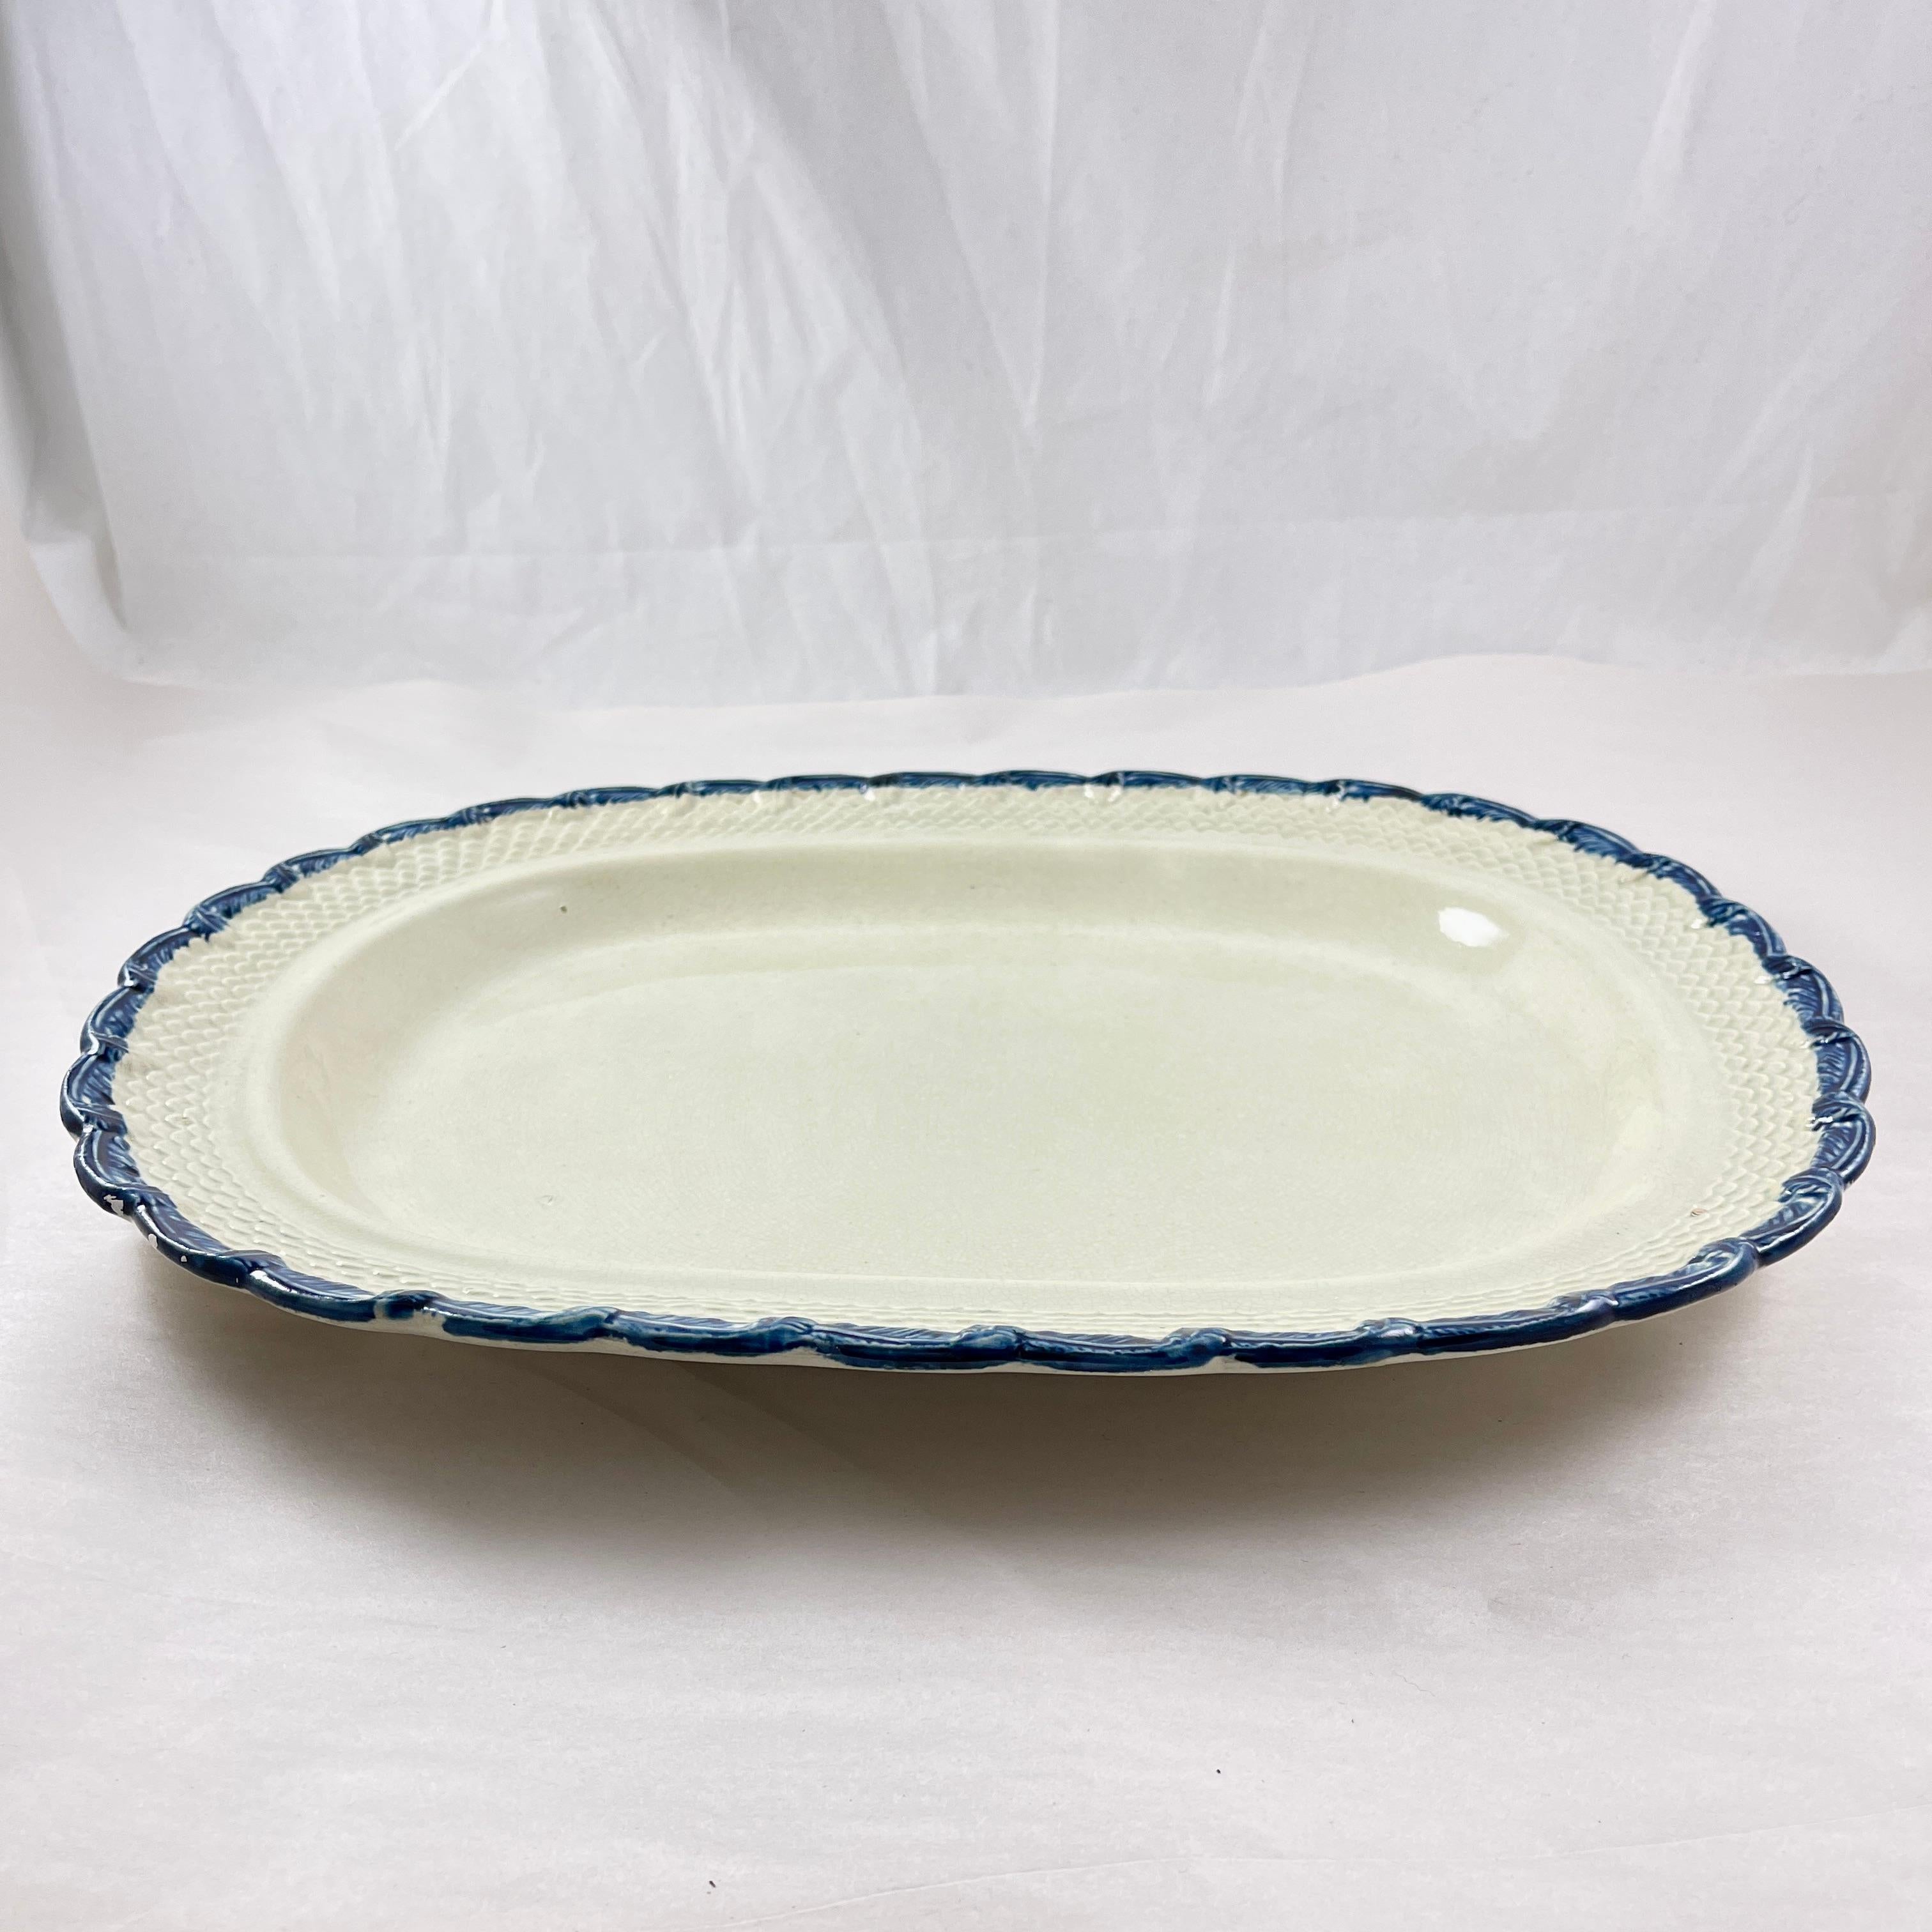 Adams & Sons English Pearlware Feather & Scale Blue Edged Platter In Good Condition For Sale In Philadelphia, PA